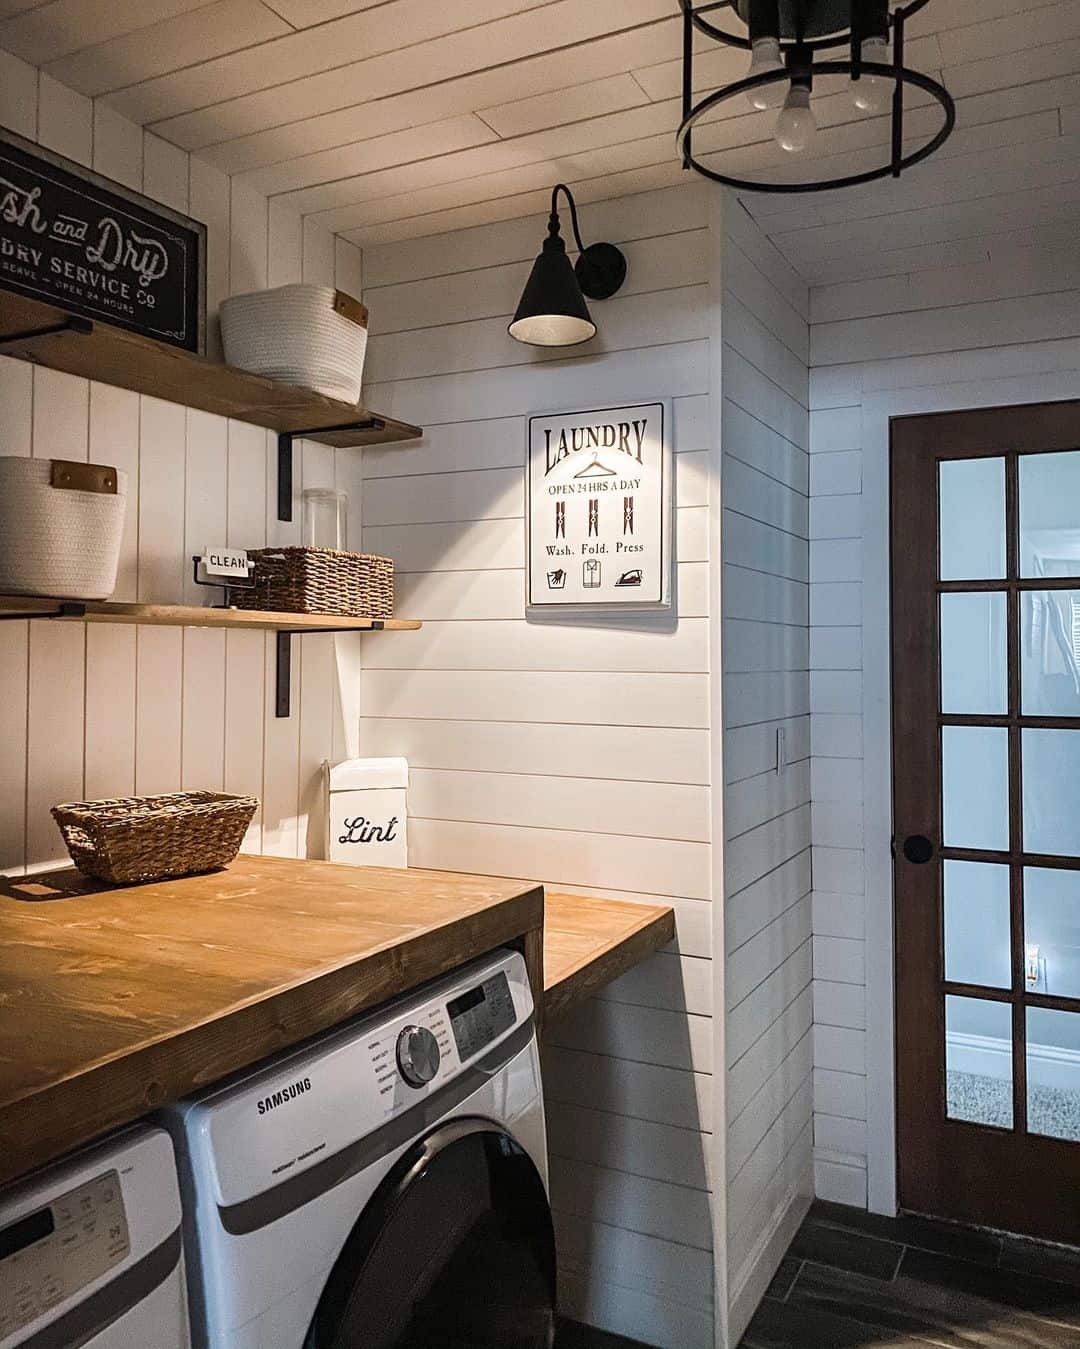 Whimsical Laundry Signs on Horizontal and Vertical Shiplap Walls - Soul ...